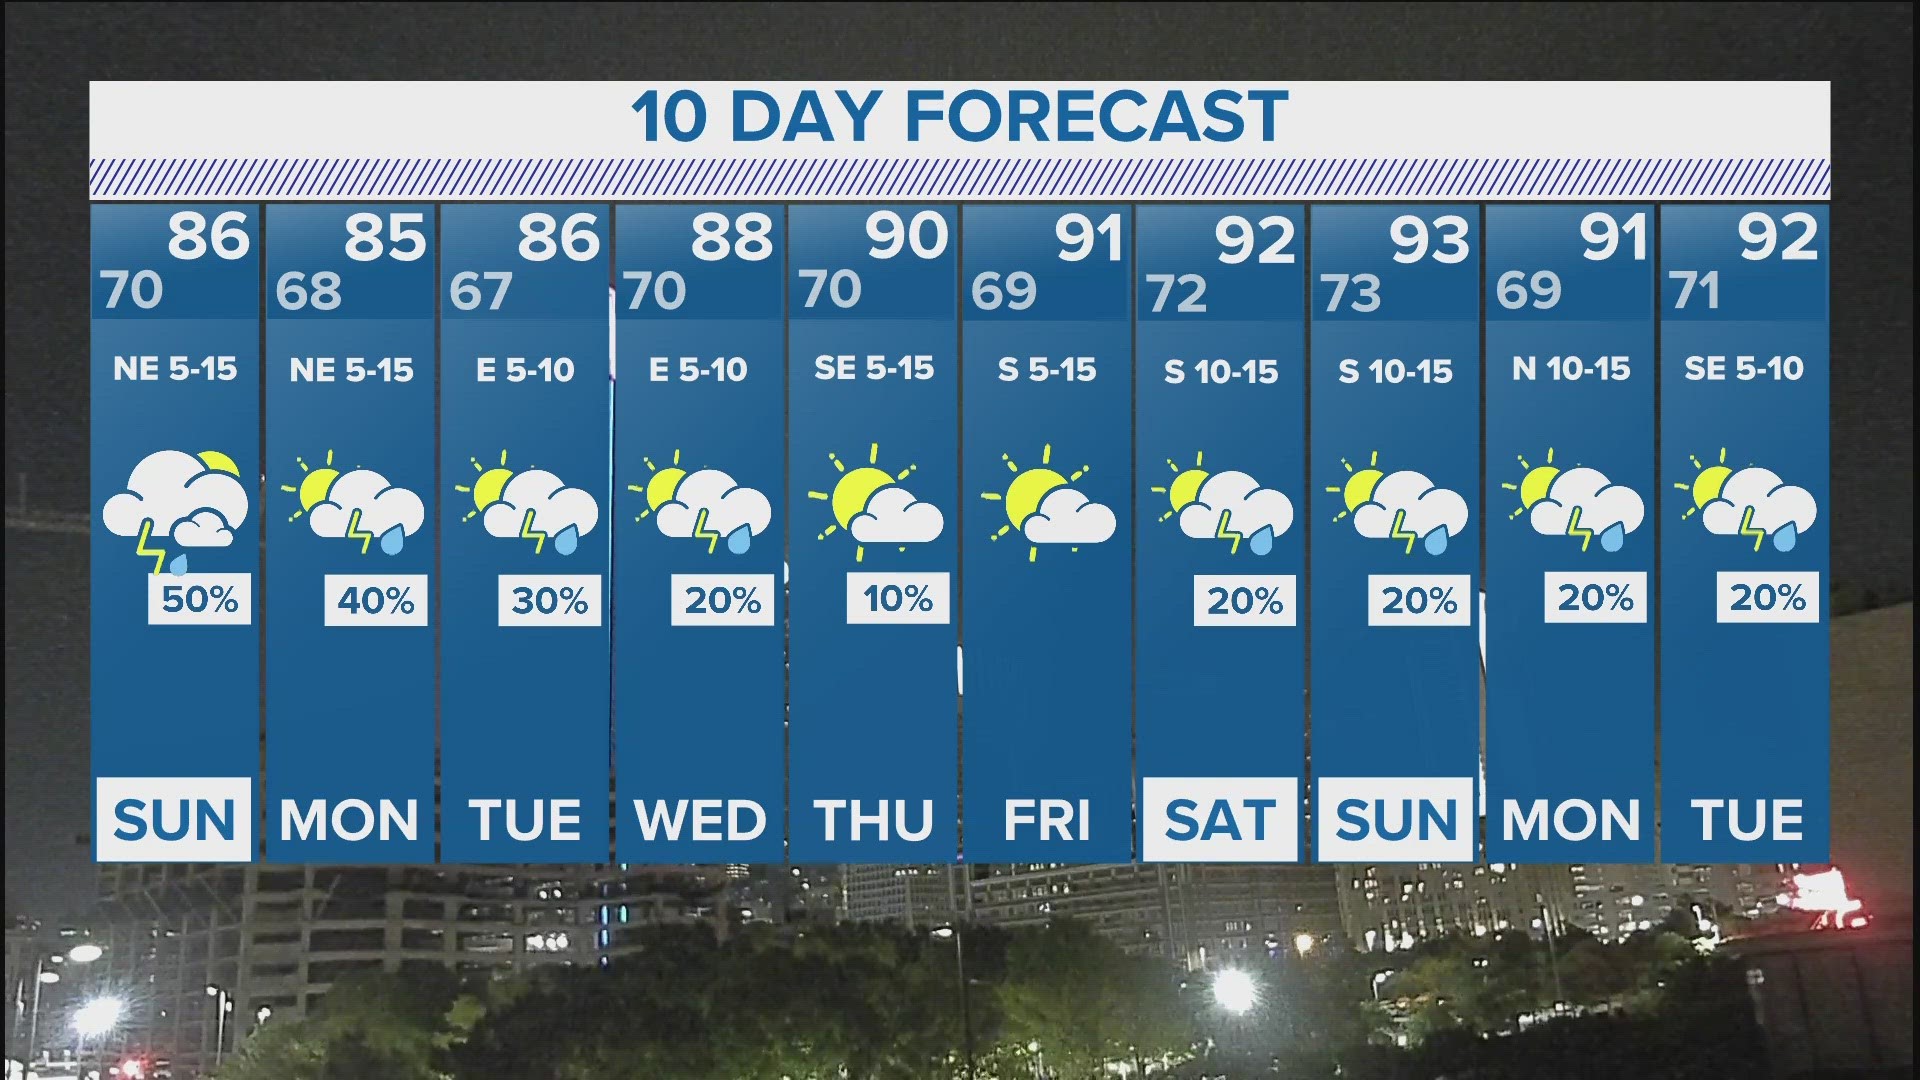 Parts of North Texas will see rain coverage throughout the week.